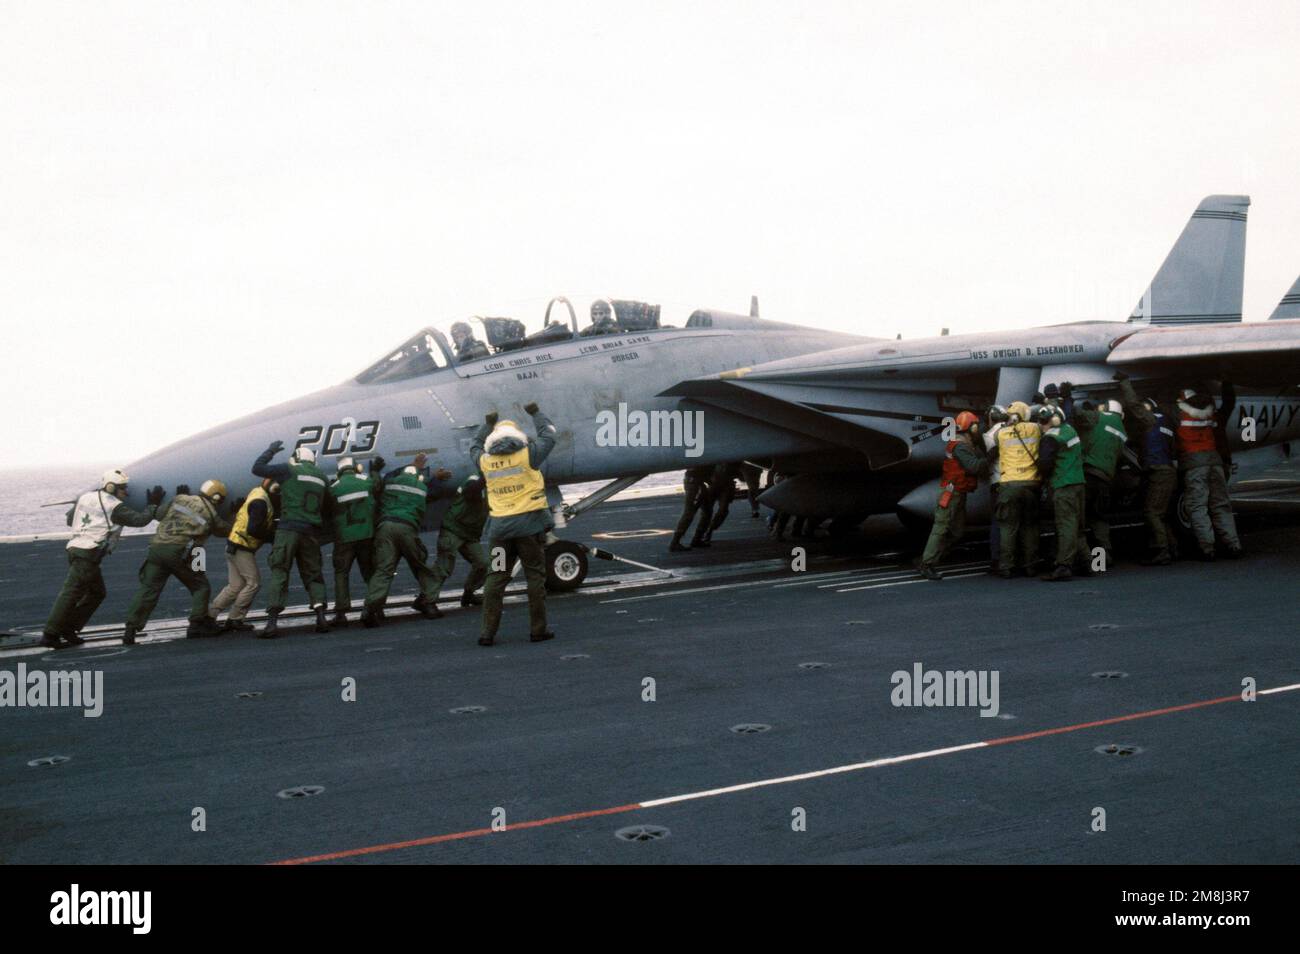 An F-14A Tomcat aircraft of Fighter Squadron Thirty Two (VF-32) is pushed back onto the catapult slot by flight deck personnel after overrunning the stop while preparing for launch from on board the nuclear-powered aircraft carrier USS DWIGHT D. EISENHOWER (CVN-69) during carrier qualifications off the Virginia Capes. Country: Atlantic Ocean (AOC) Stock Photo